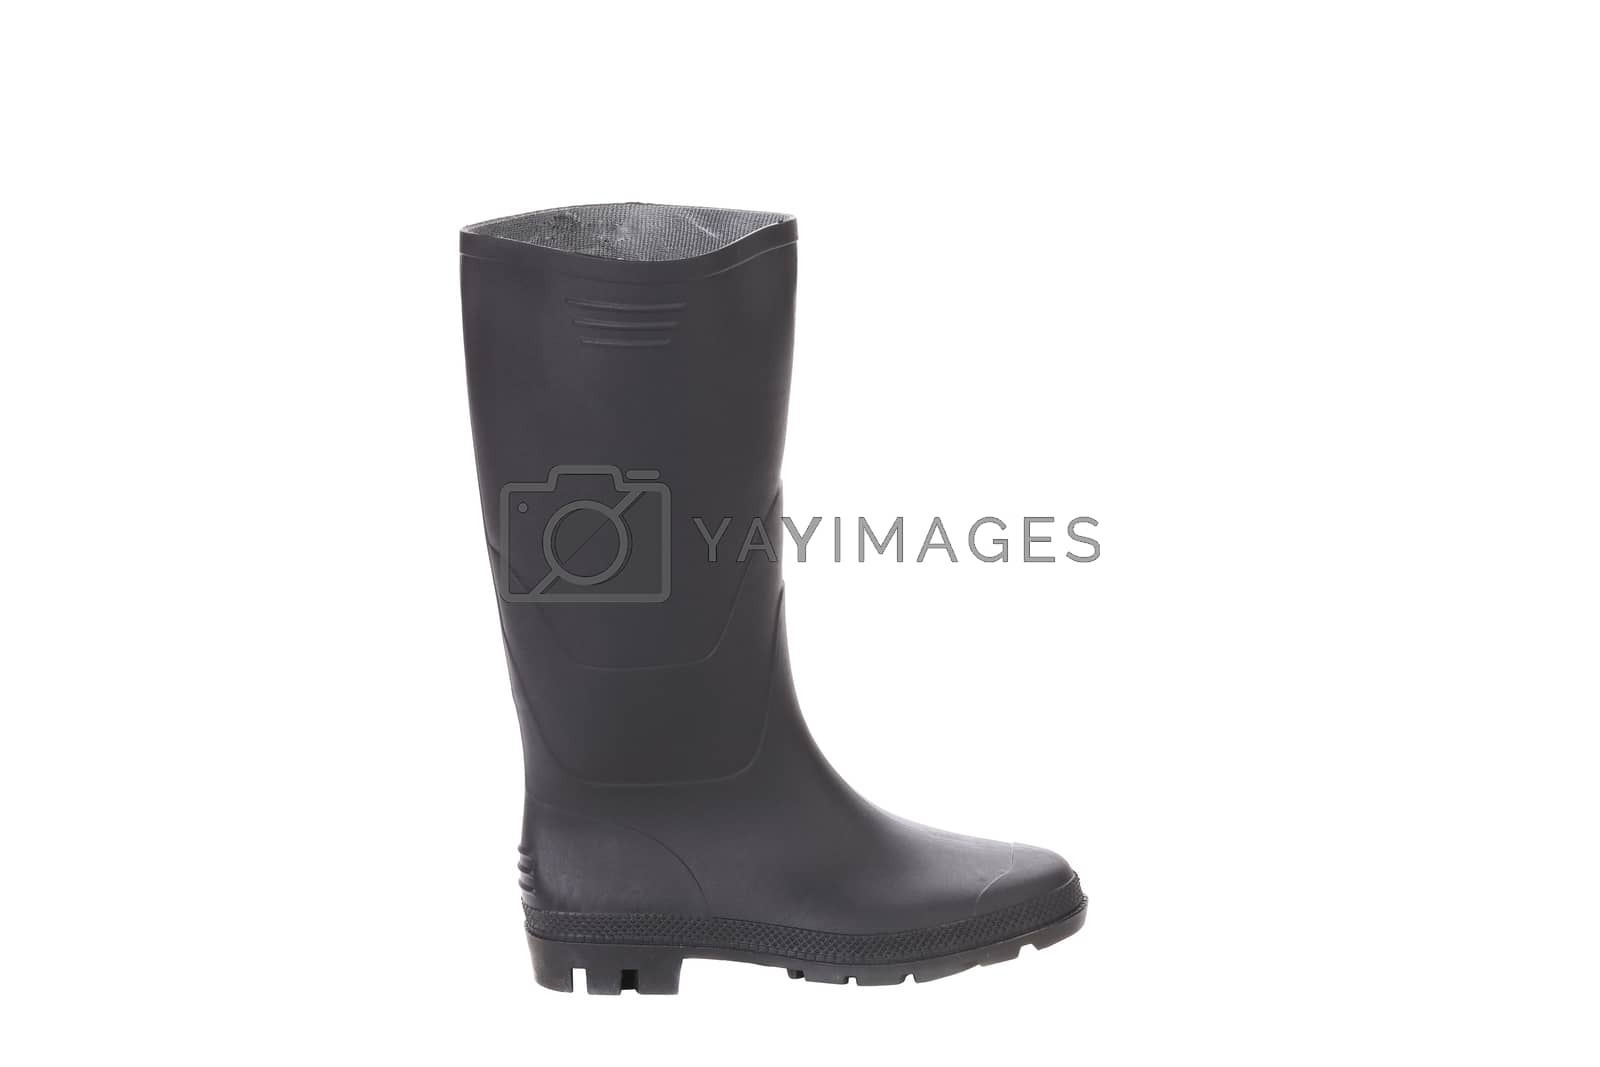 Royalty free image of High rubber boot black color. by indigolotos